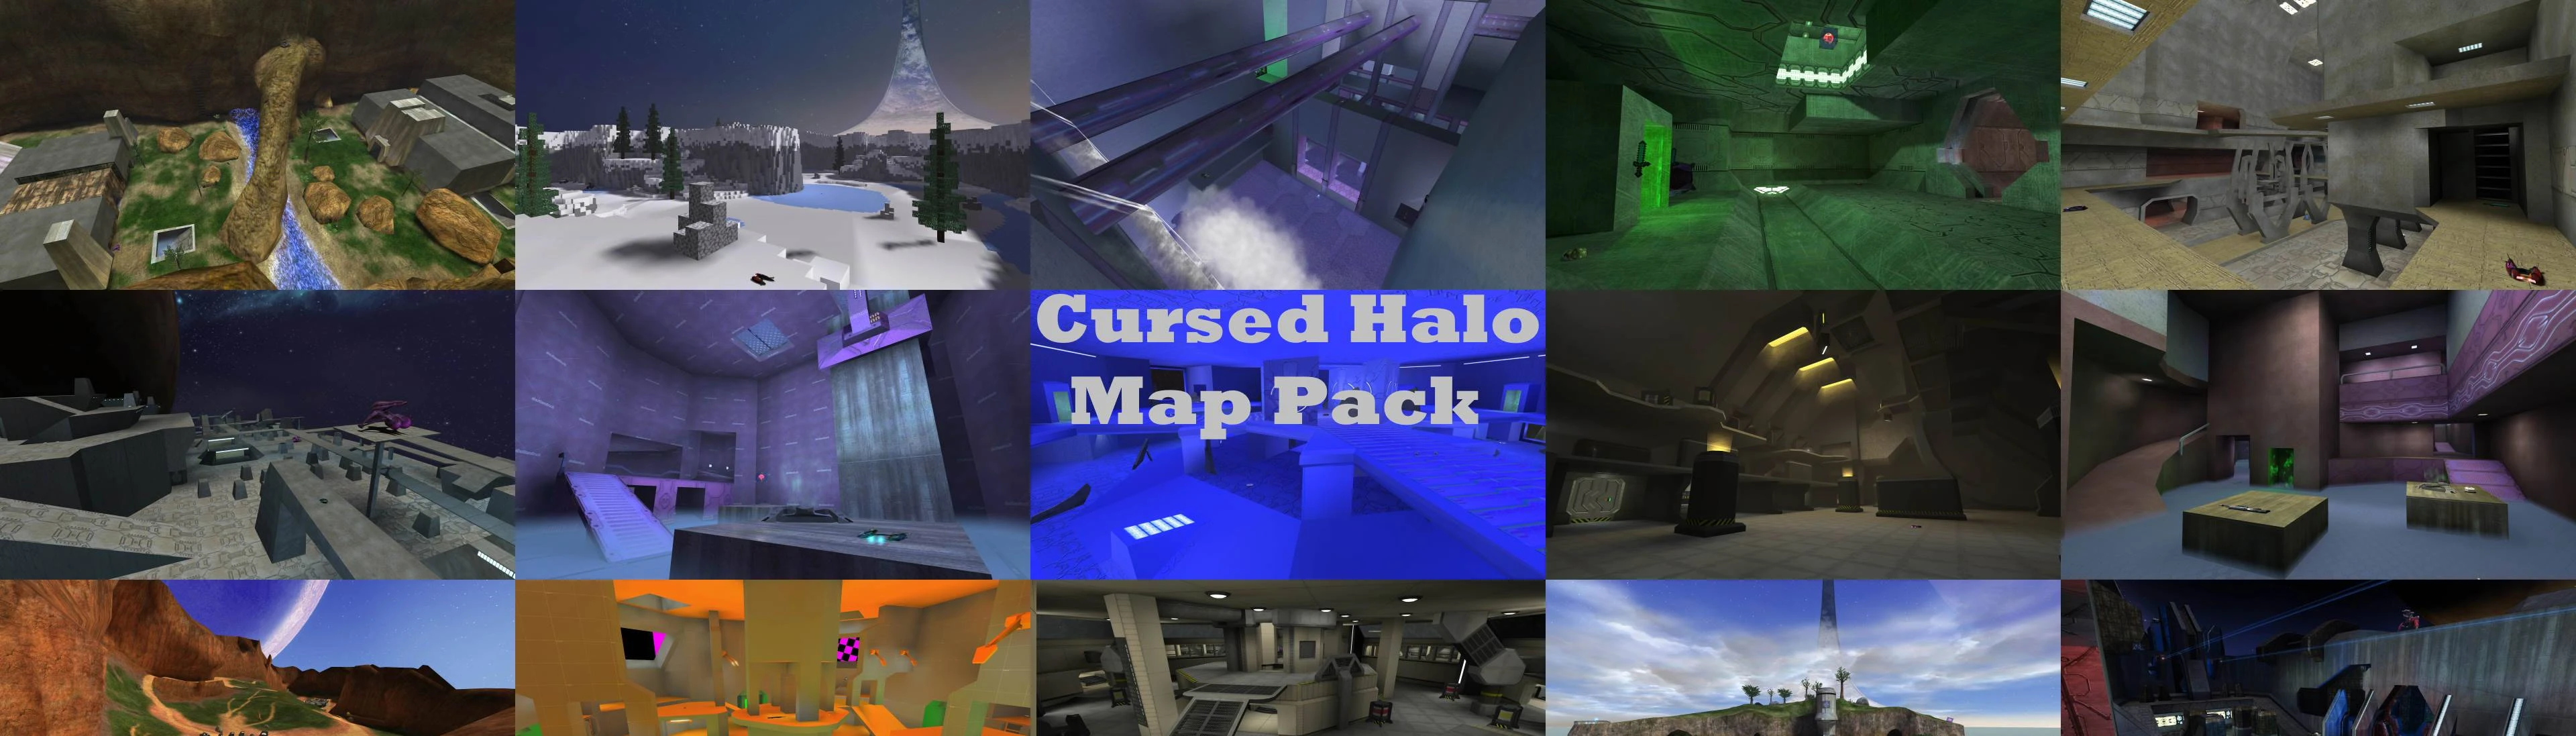 Cursed Halo Map Pack for MCC at Halo: The Master Chief Collection Nexus -  Mods and community